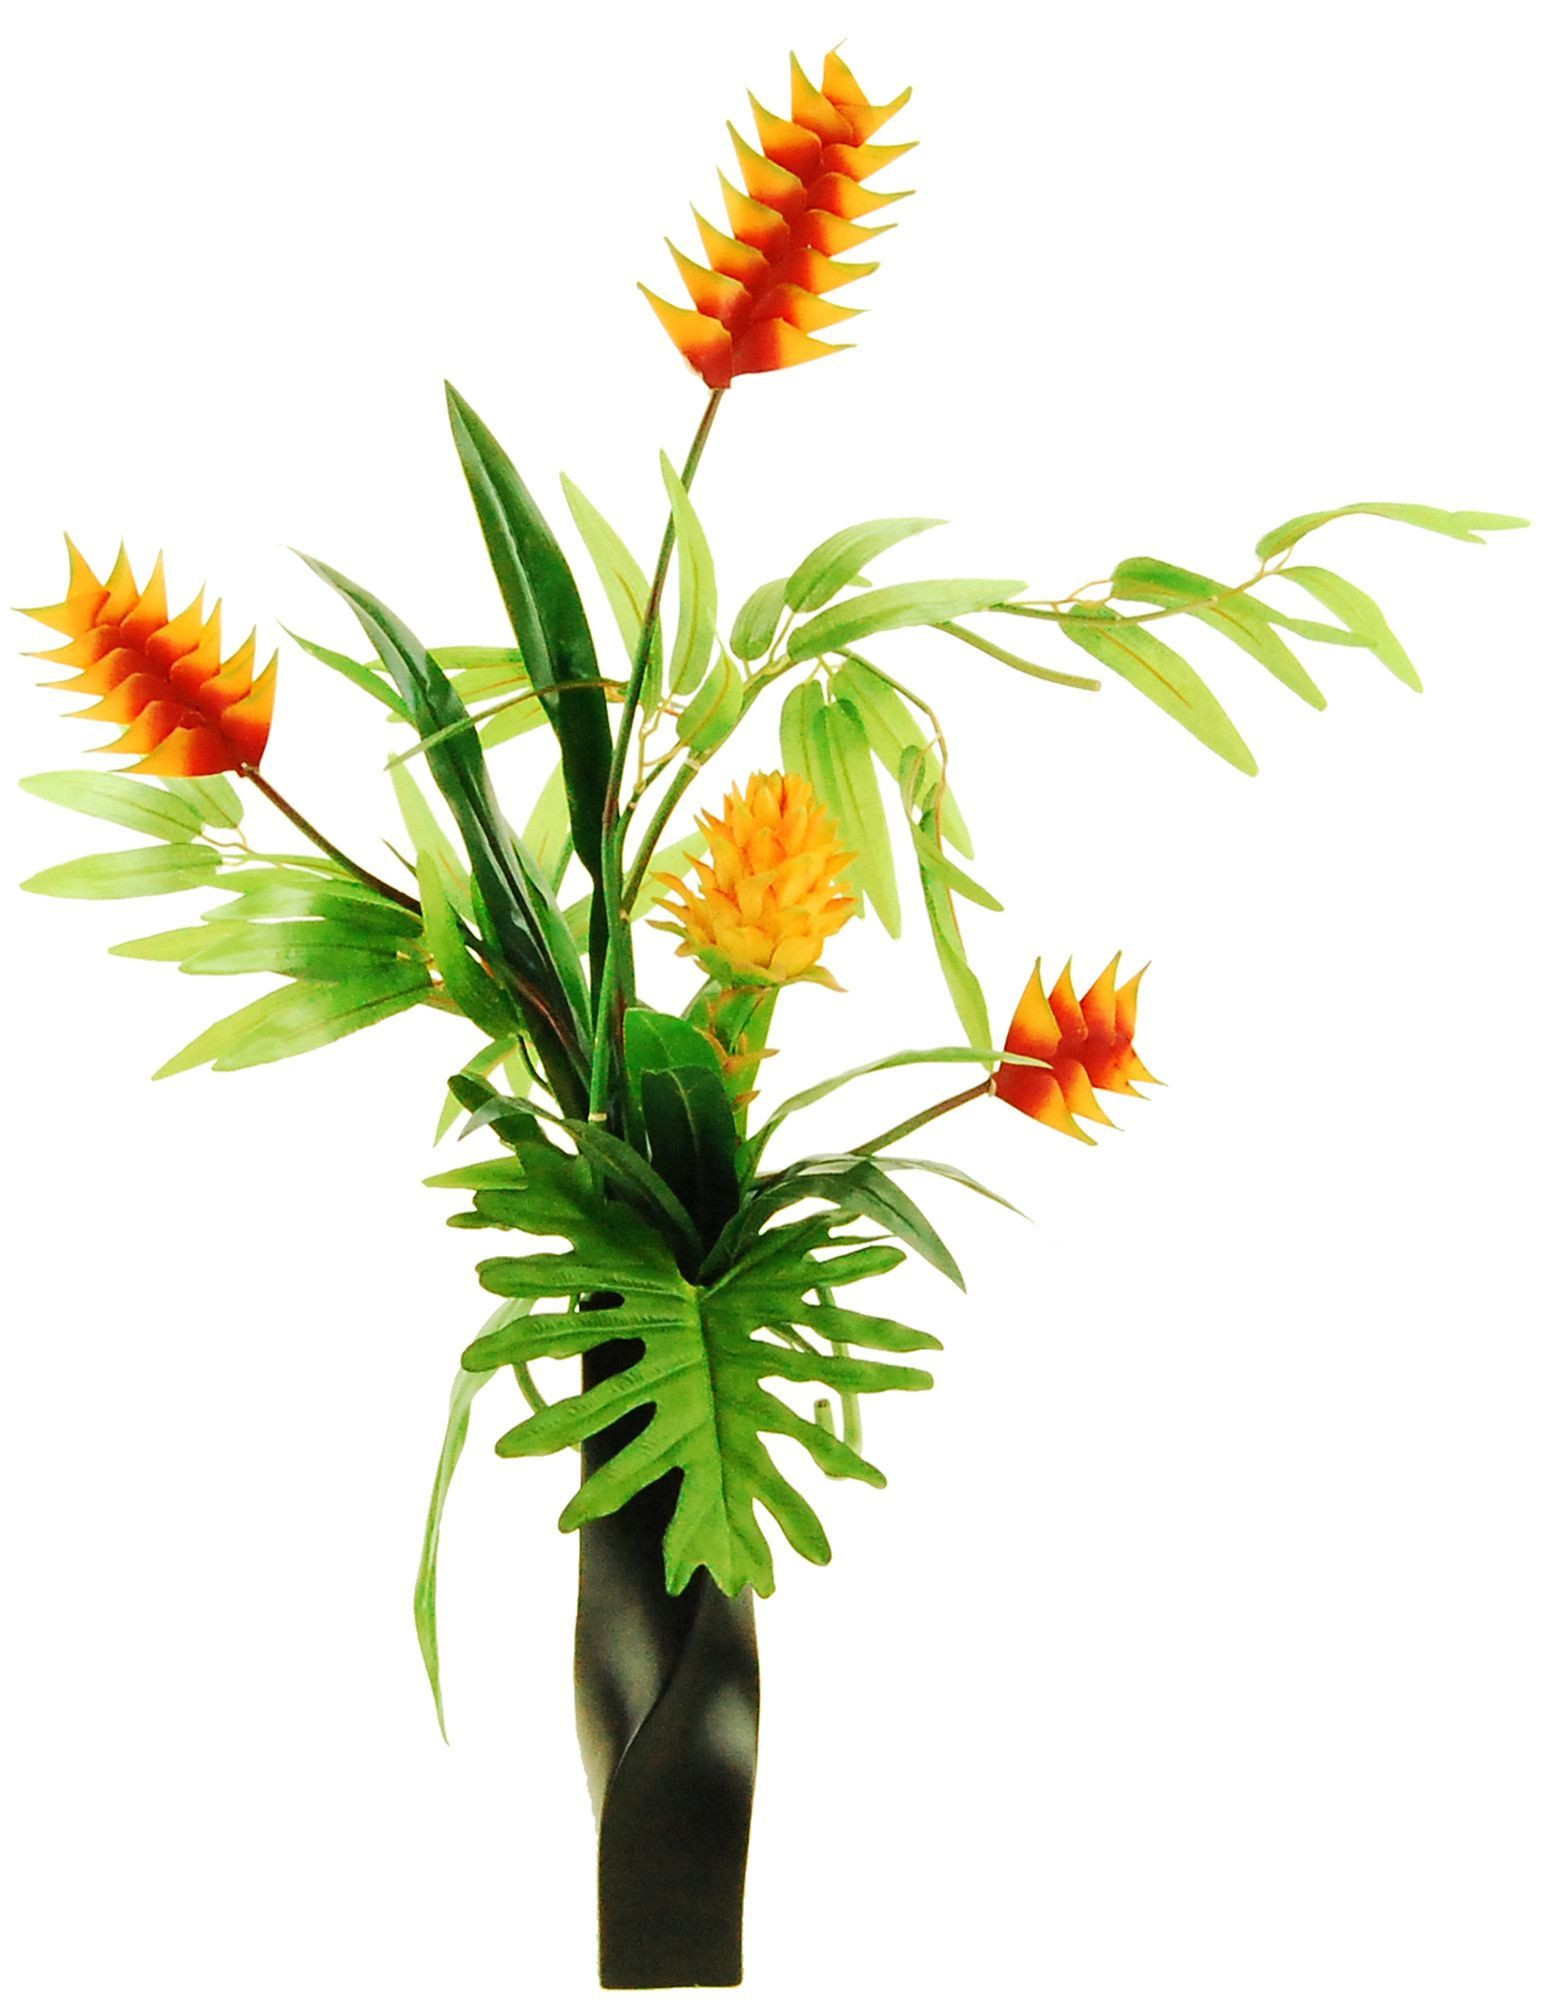 29 Fabulous Ginger Vases wholesale 2024 free download ginger vases wholesale of tropical garden in ceramic vase products pinterest tropical pertaining to tropical garden in ceramic vase